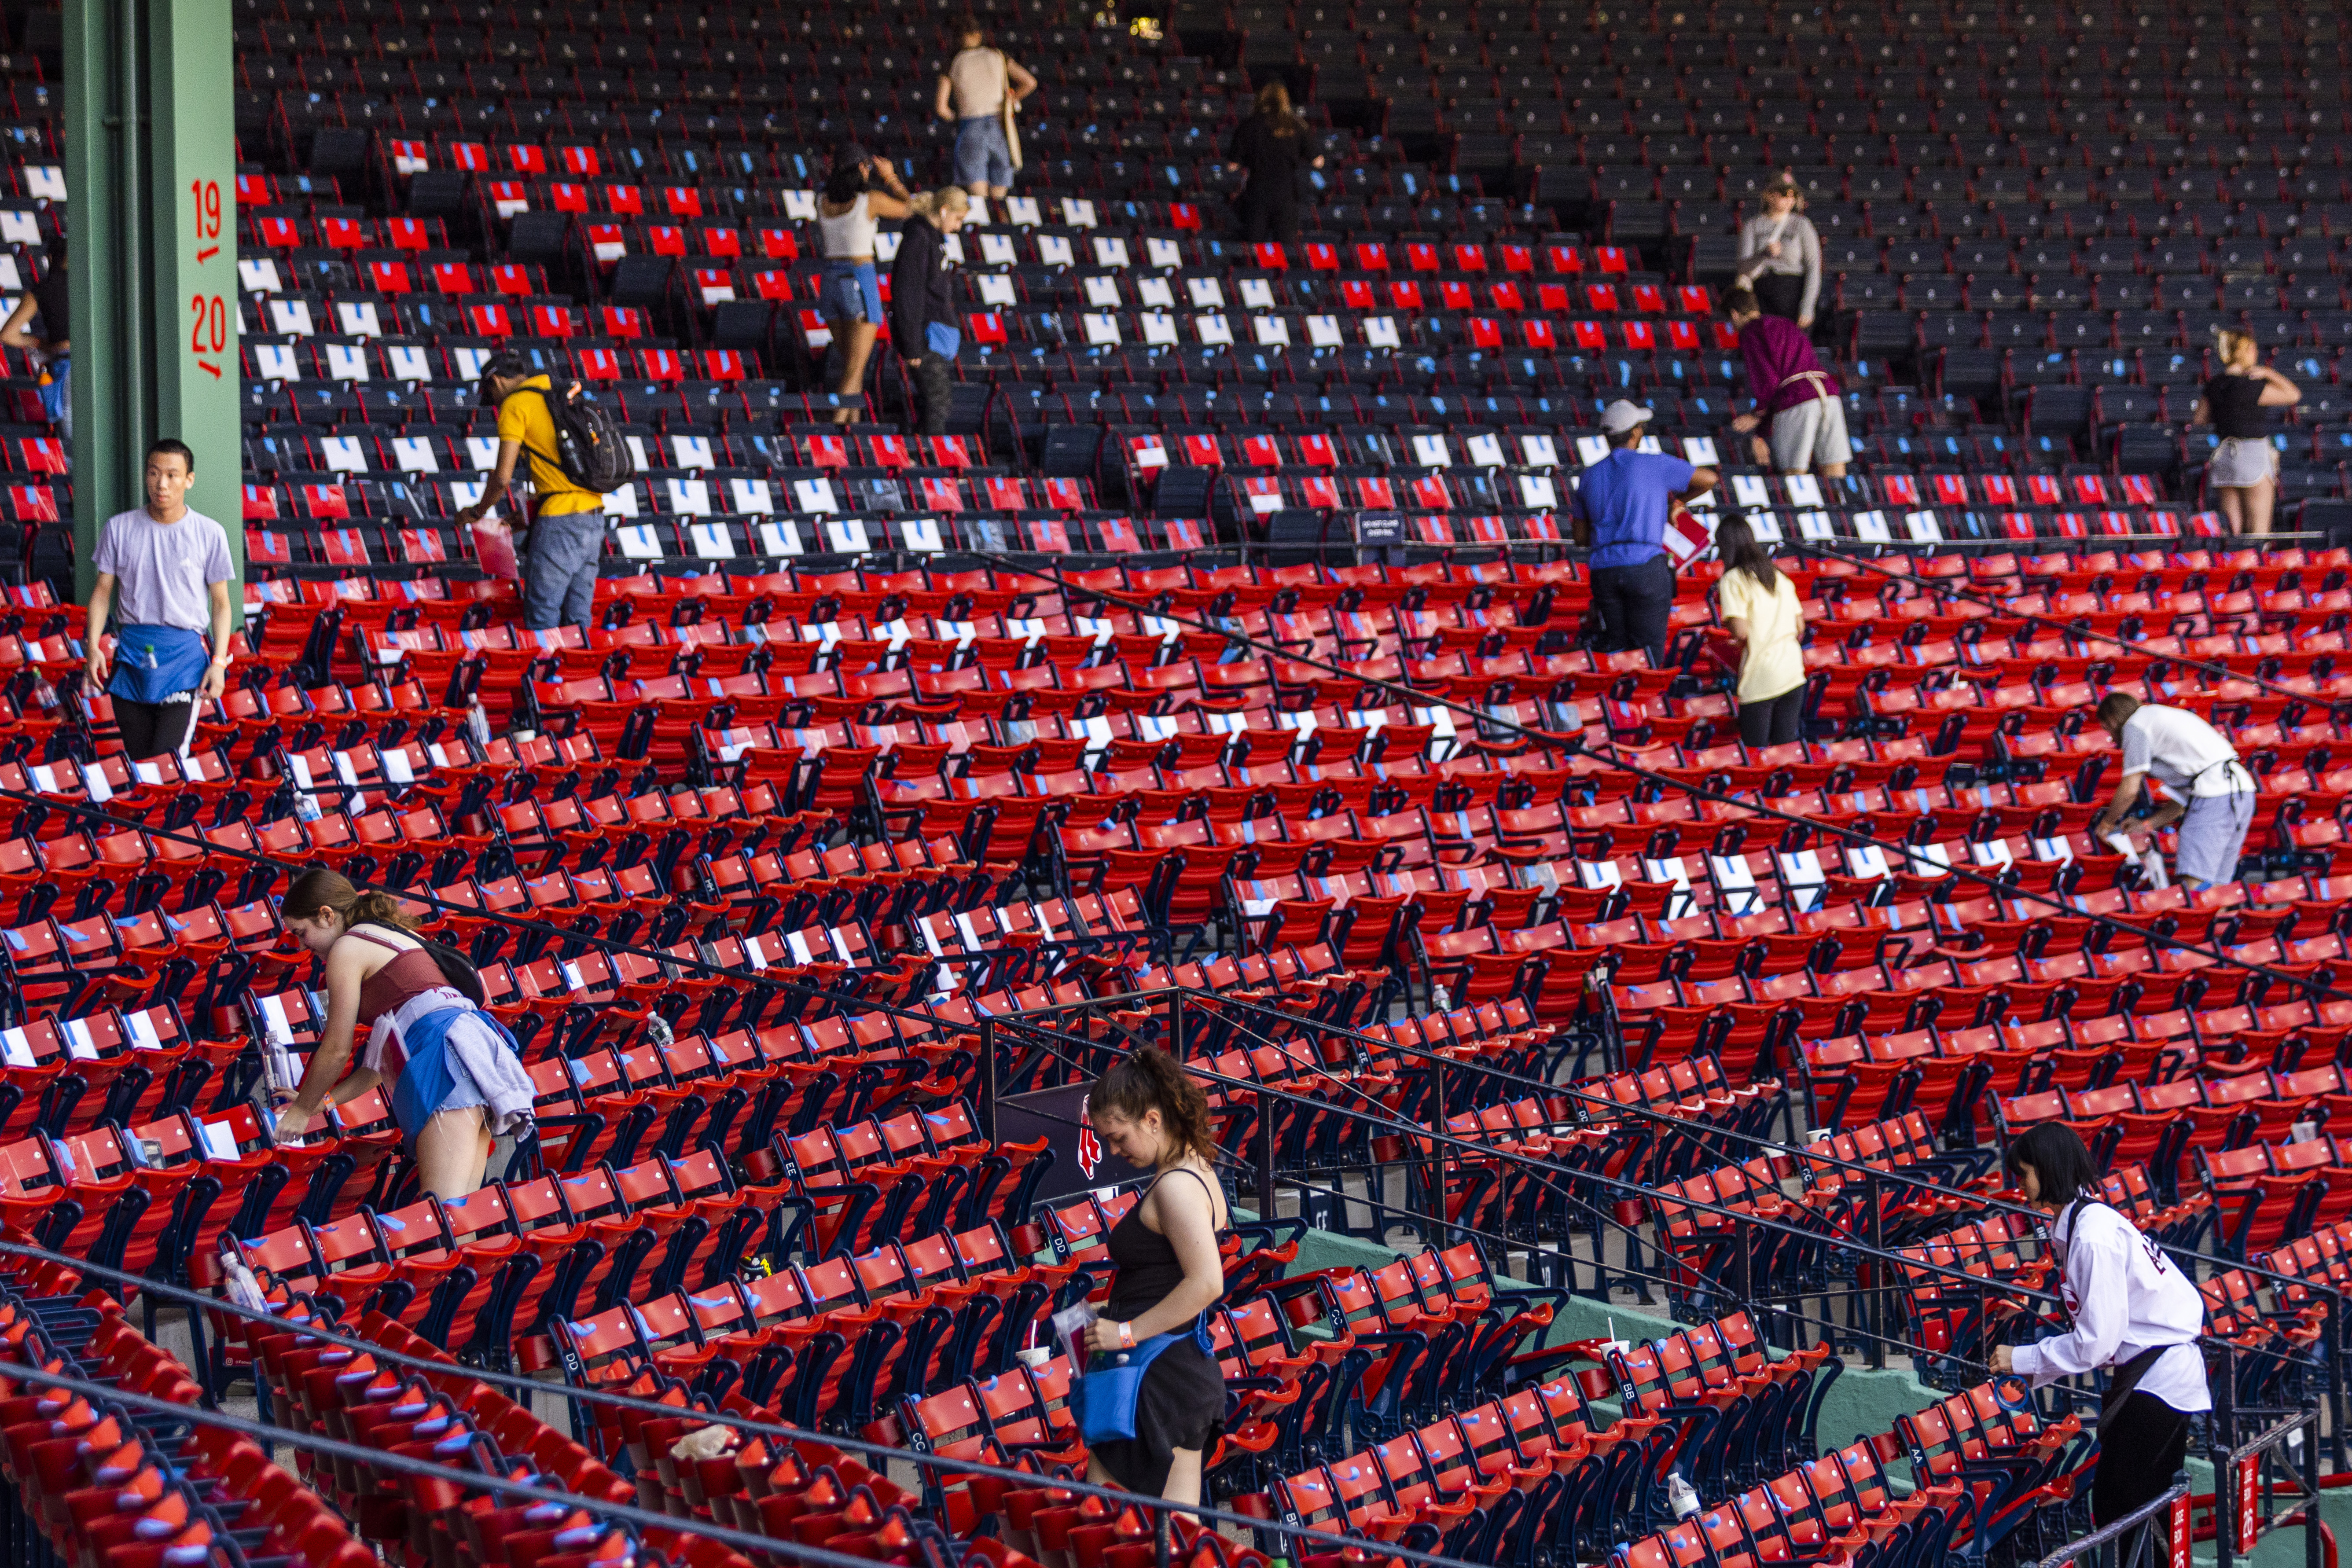 volunteers placing red cards on the seats at Fenway Park